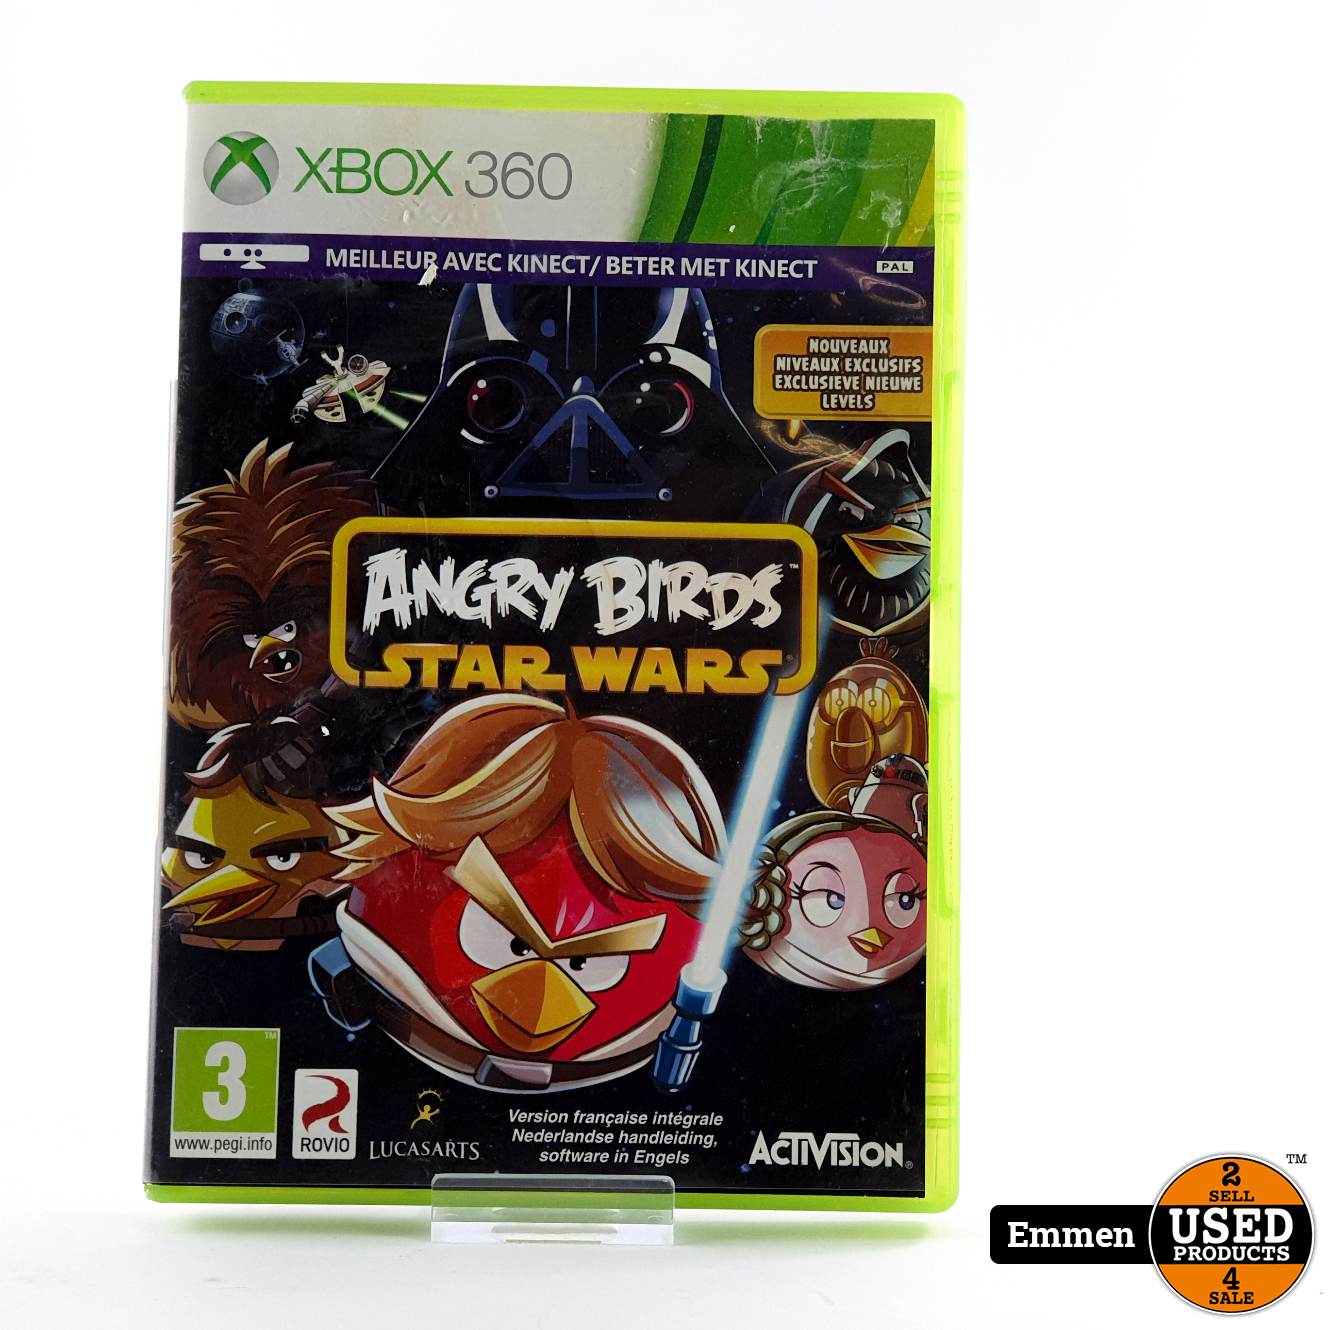 vonk absorptie opwinding Xbox 360 Game: Angrybirds Star Wars - Used Products Emmen